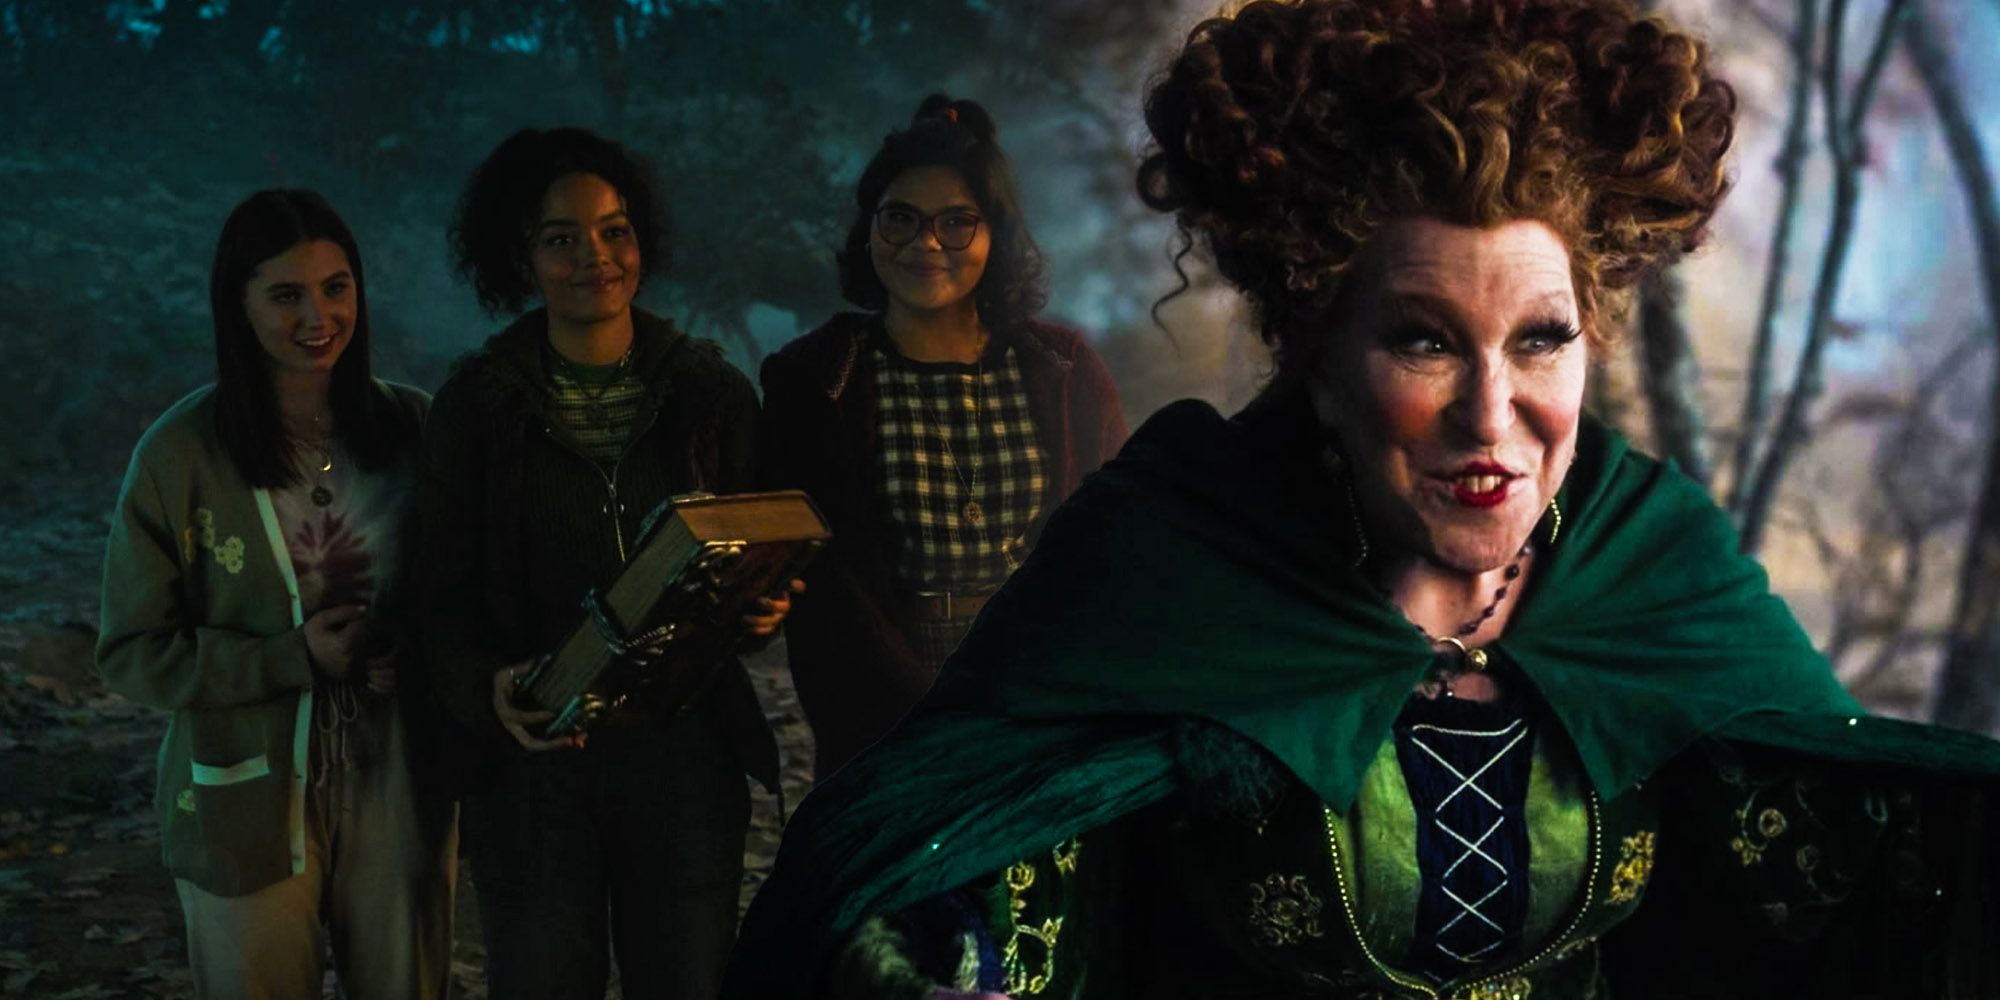 Hocus pocus 2 Winifred and new girls